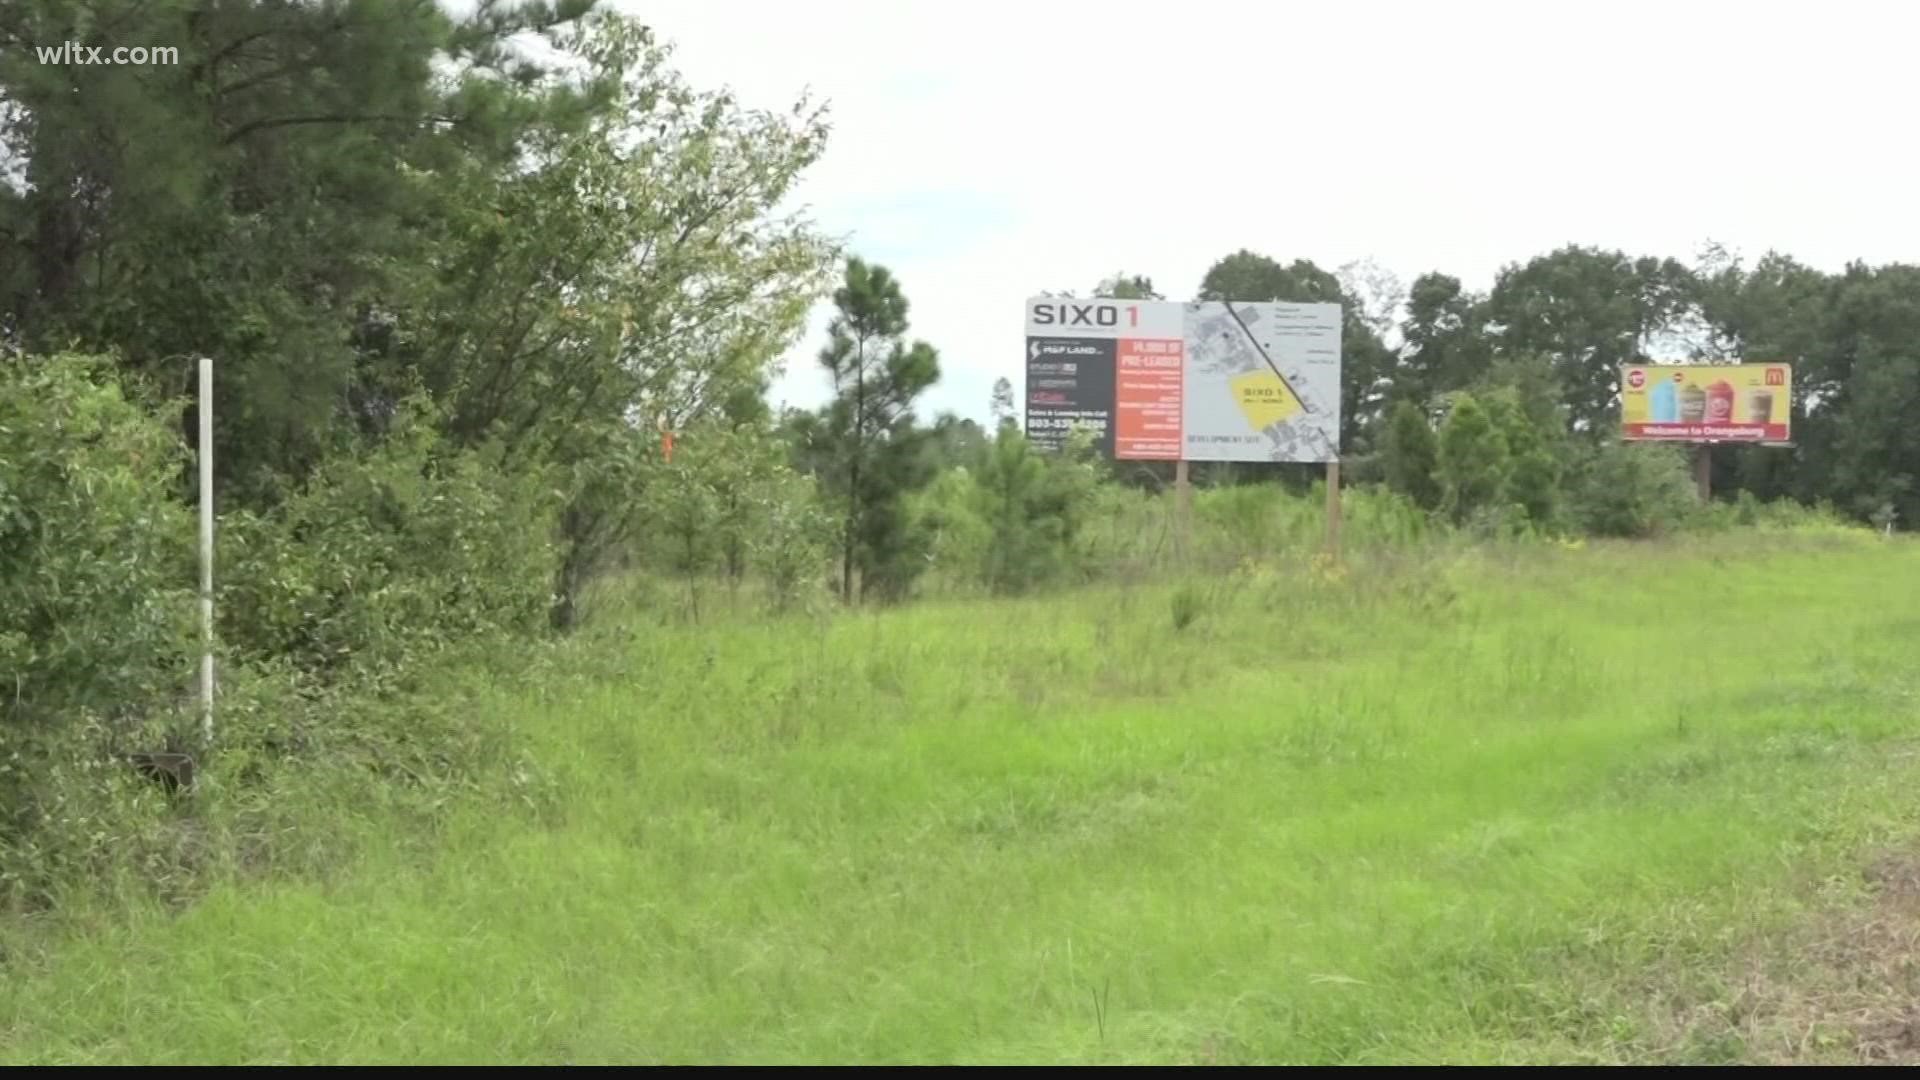 The development in Orangeburg will create 177 homes as well as new businesses.